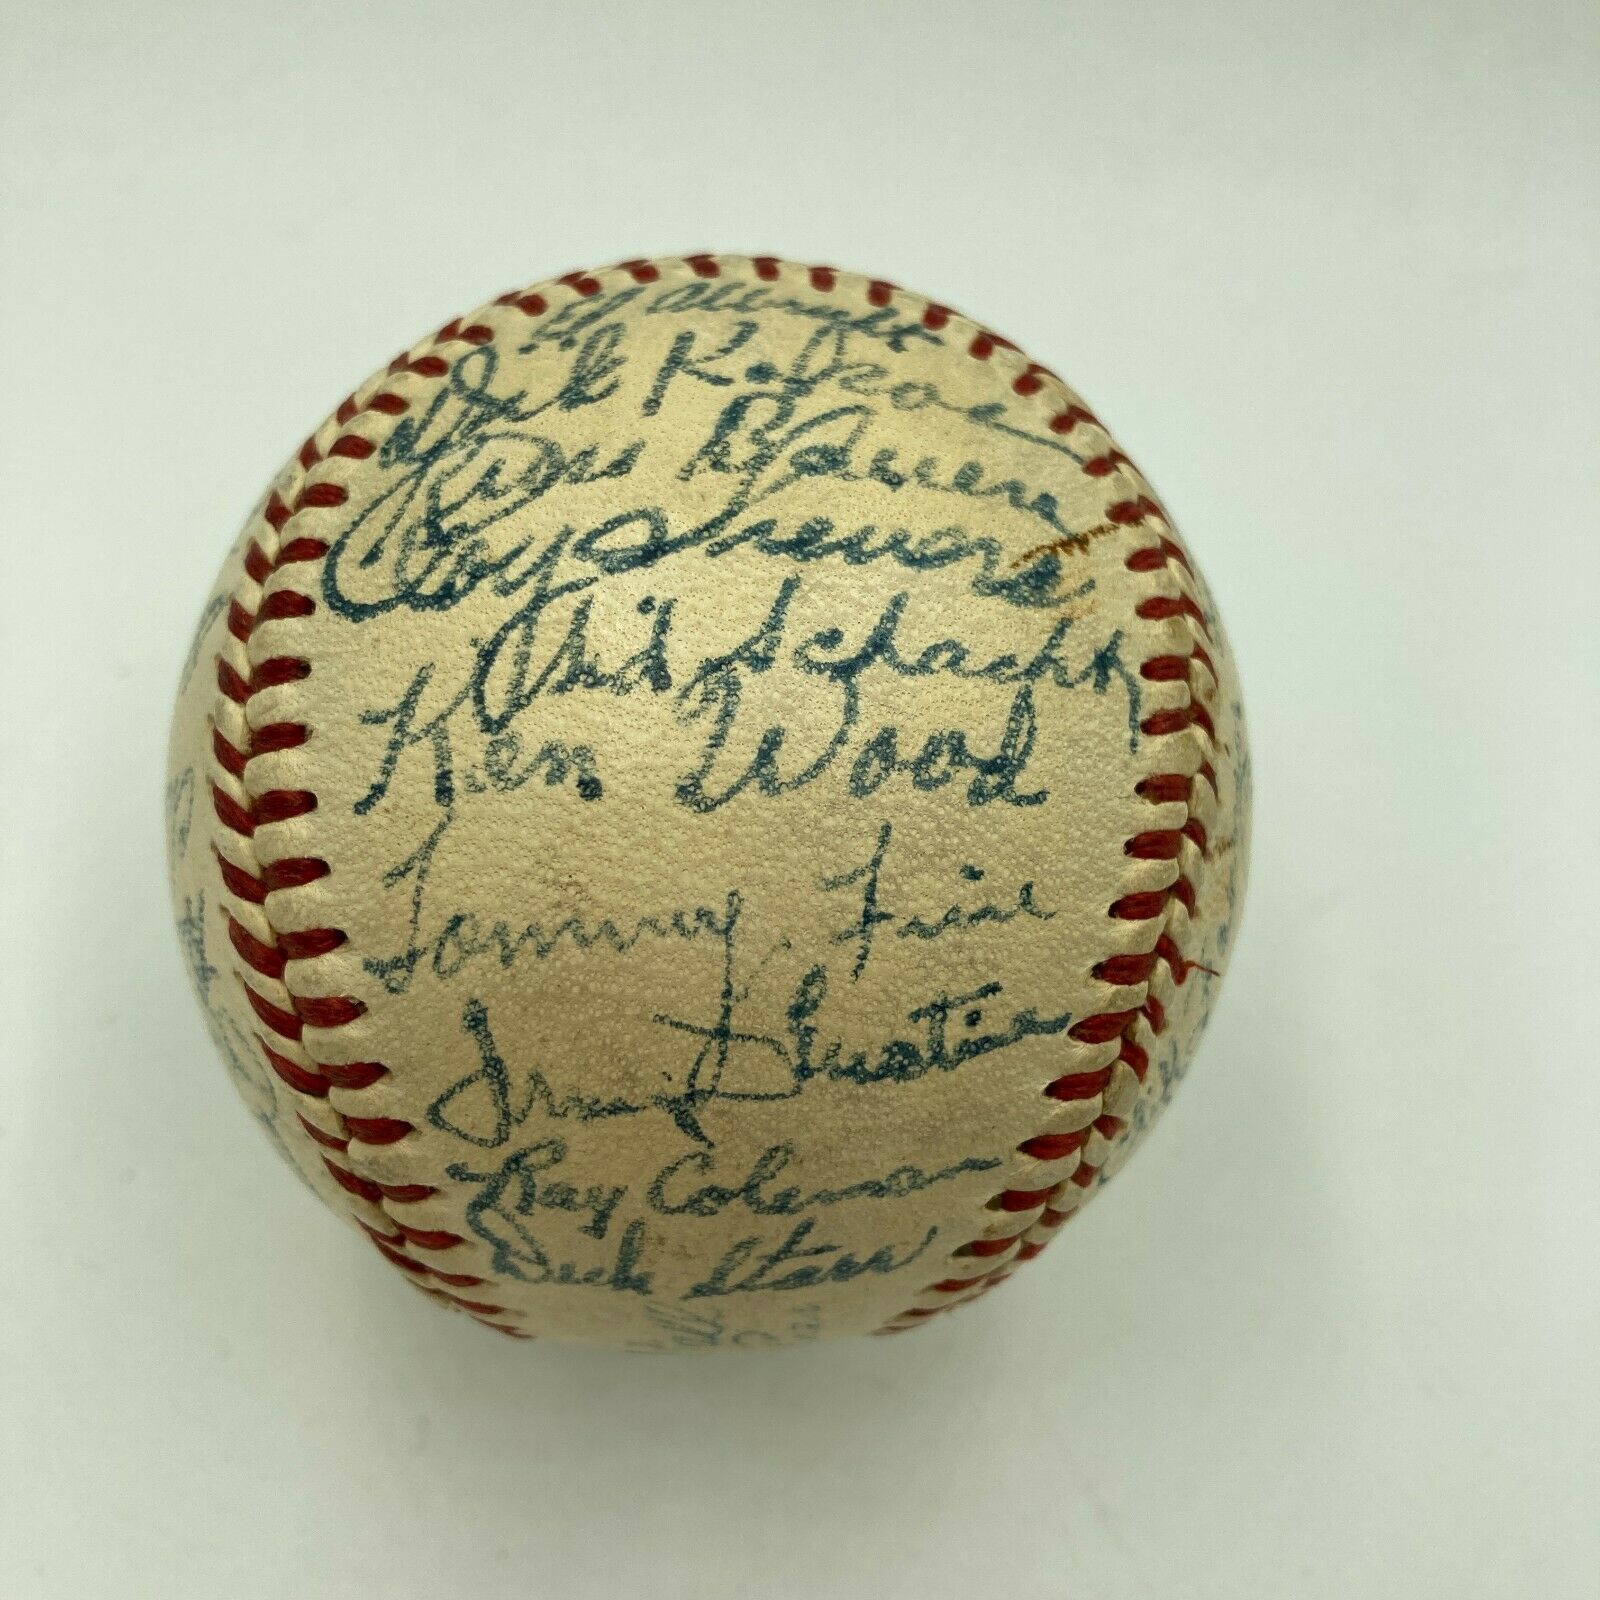 1950 Spring Training Autographed Official Baseball With 20 Total